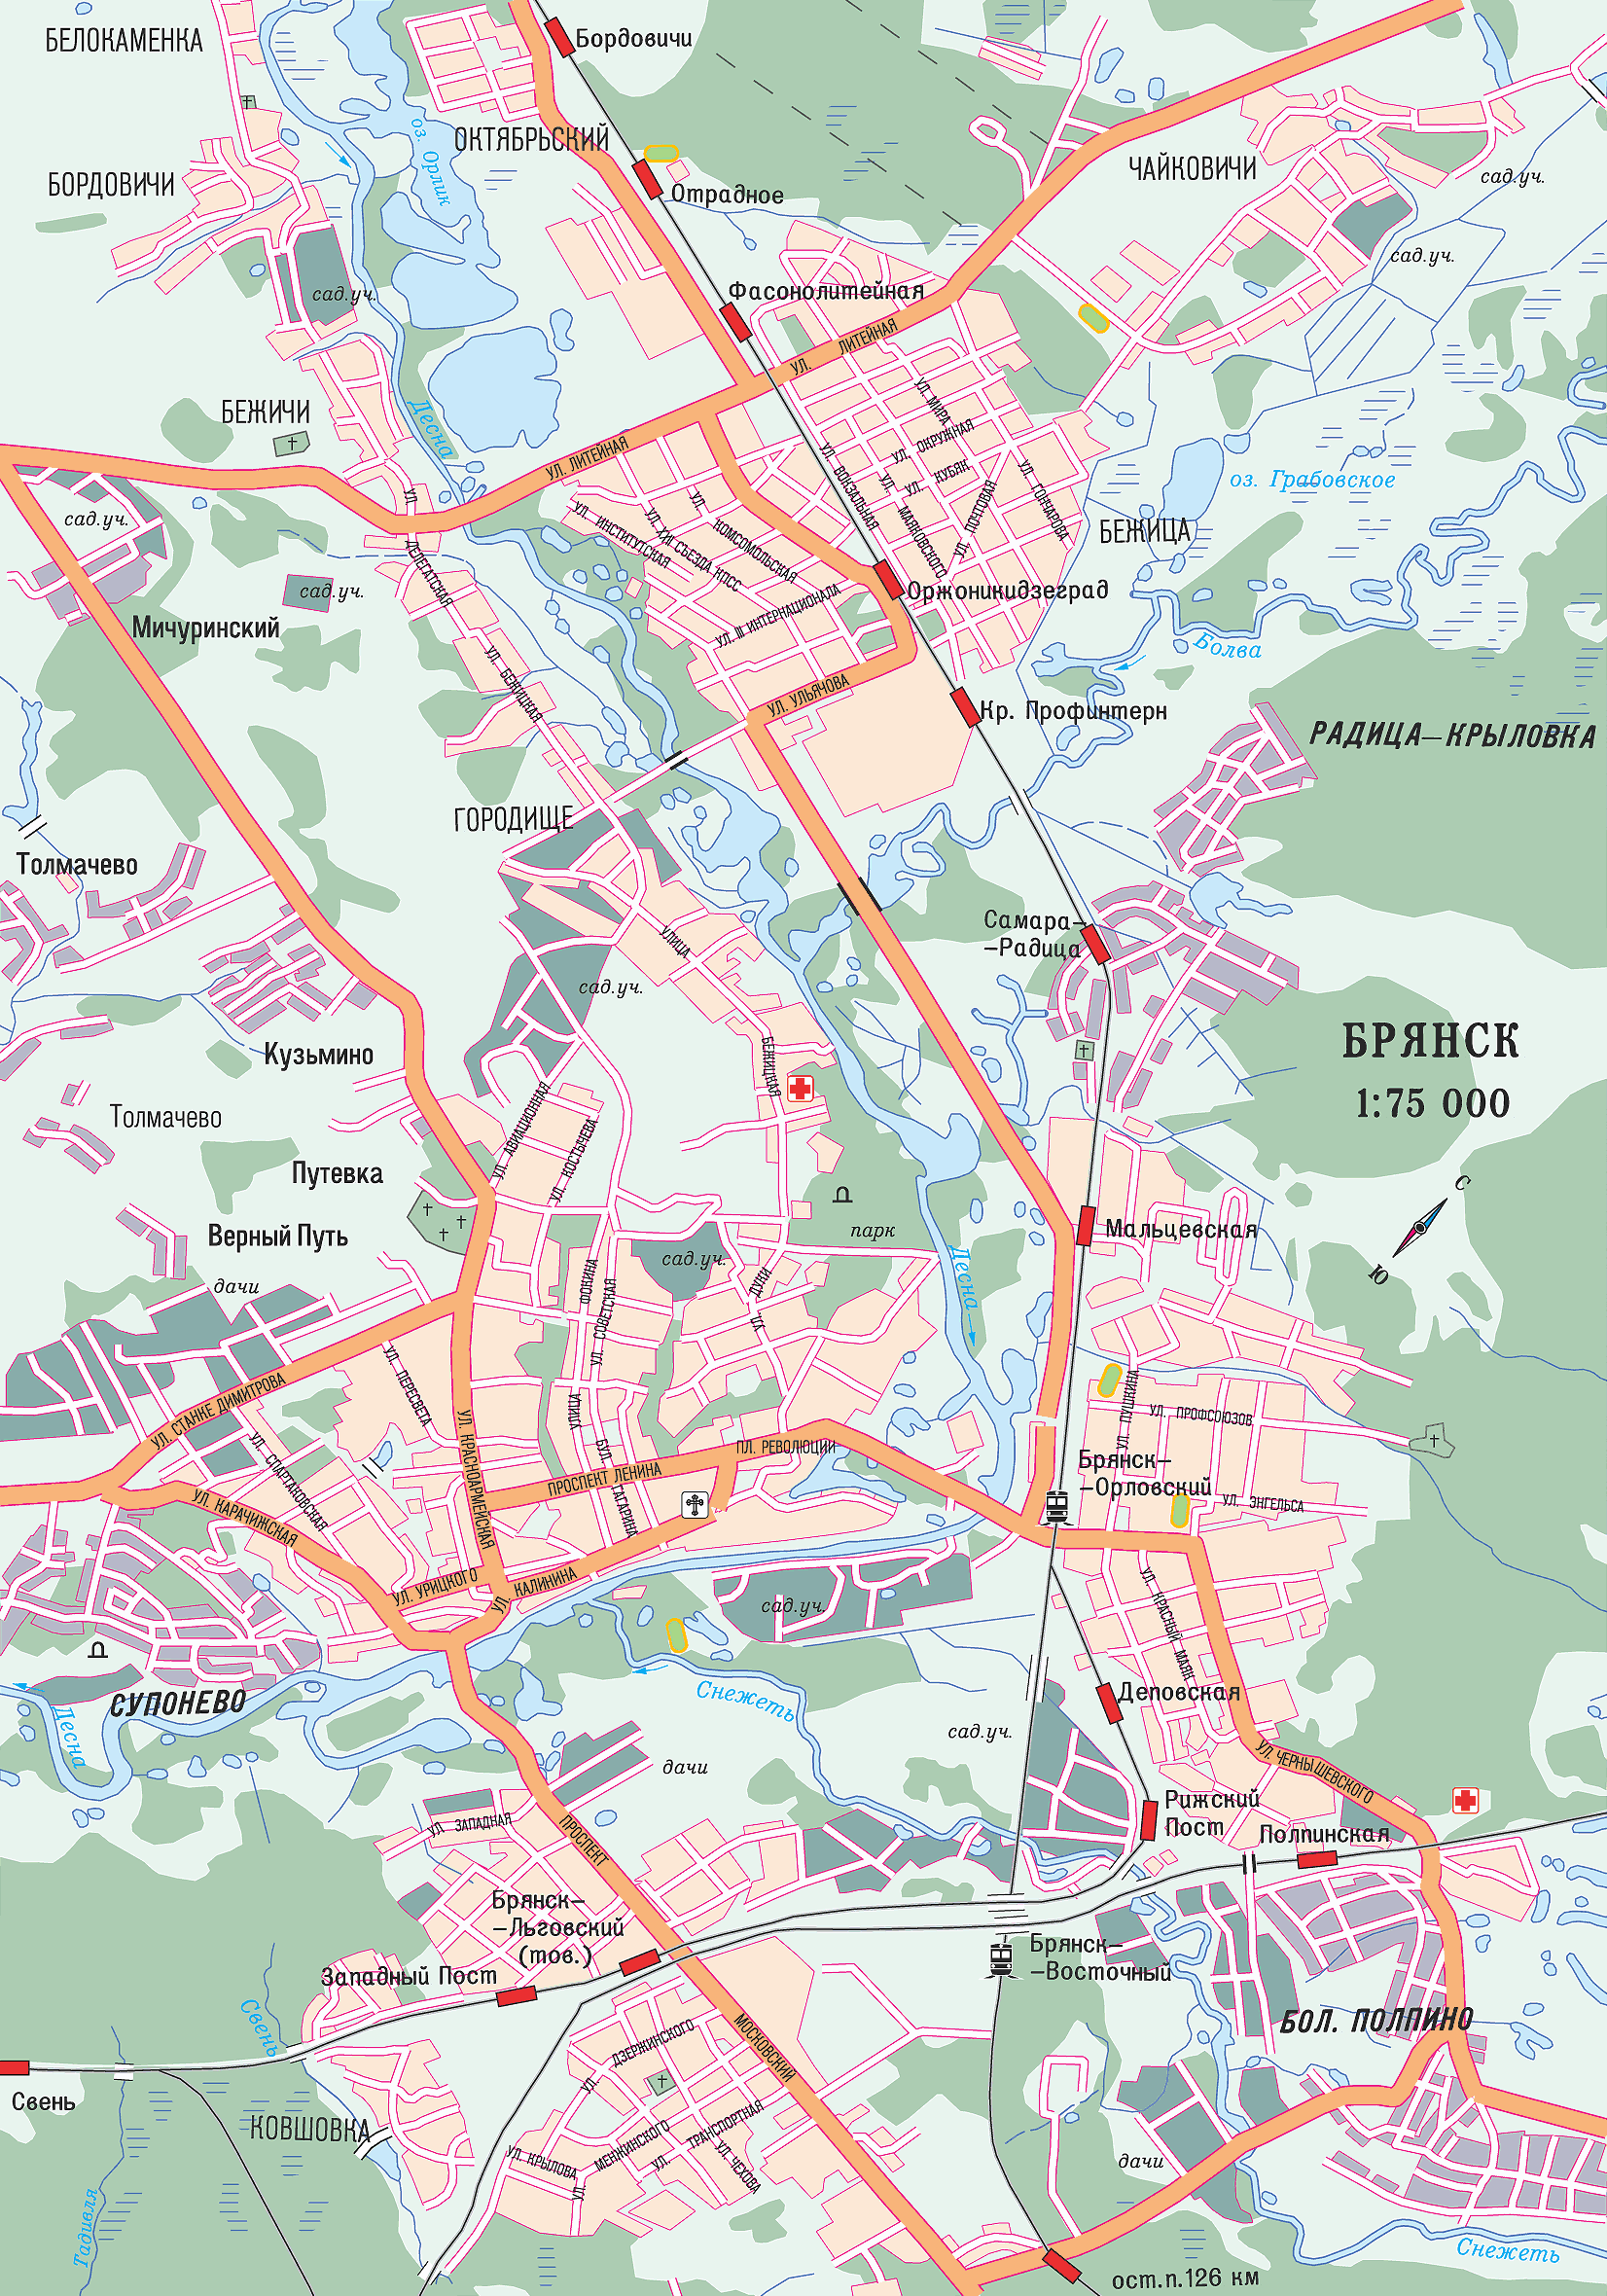 Map of Briansk